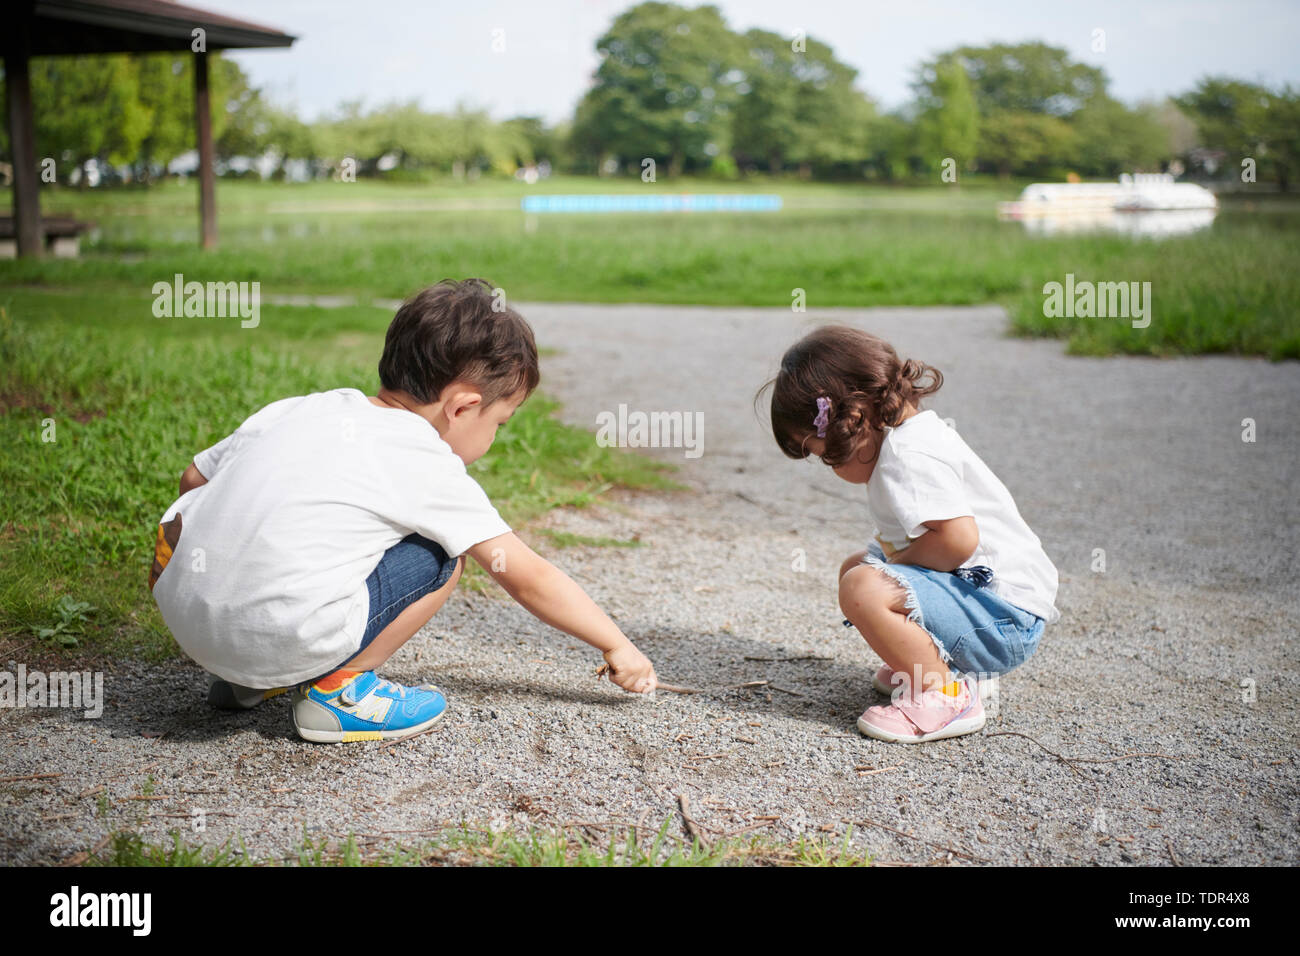 Japanese kids in a city park Stock Photo